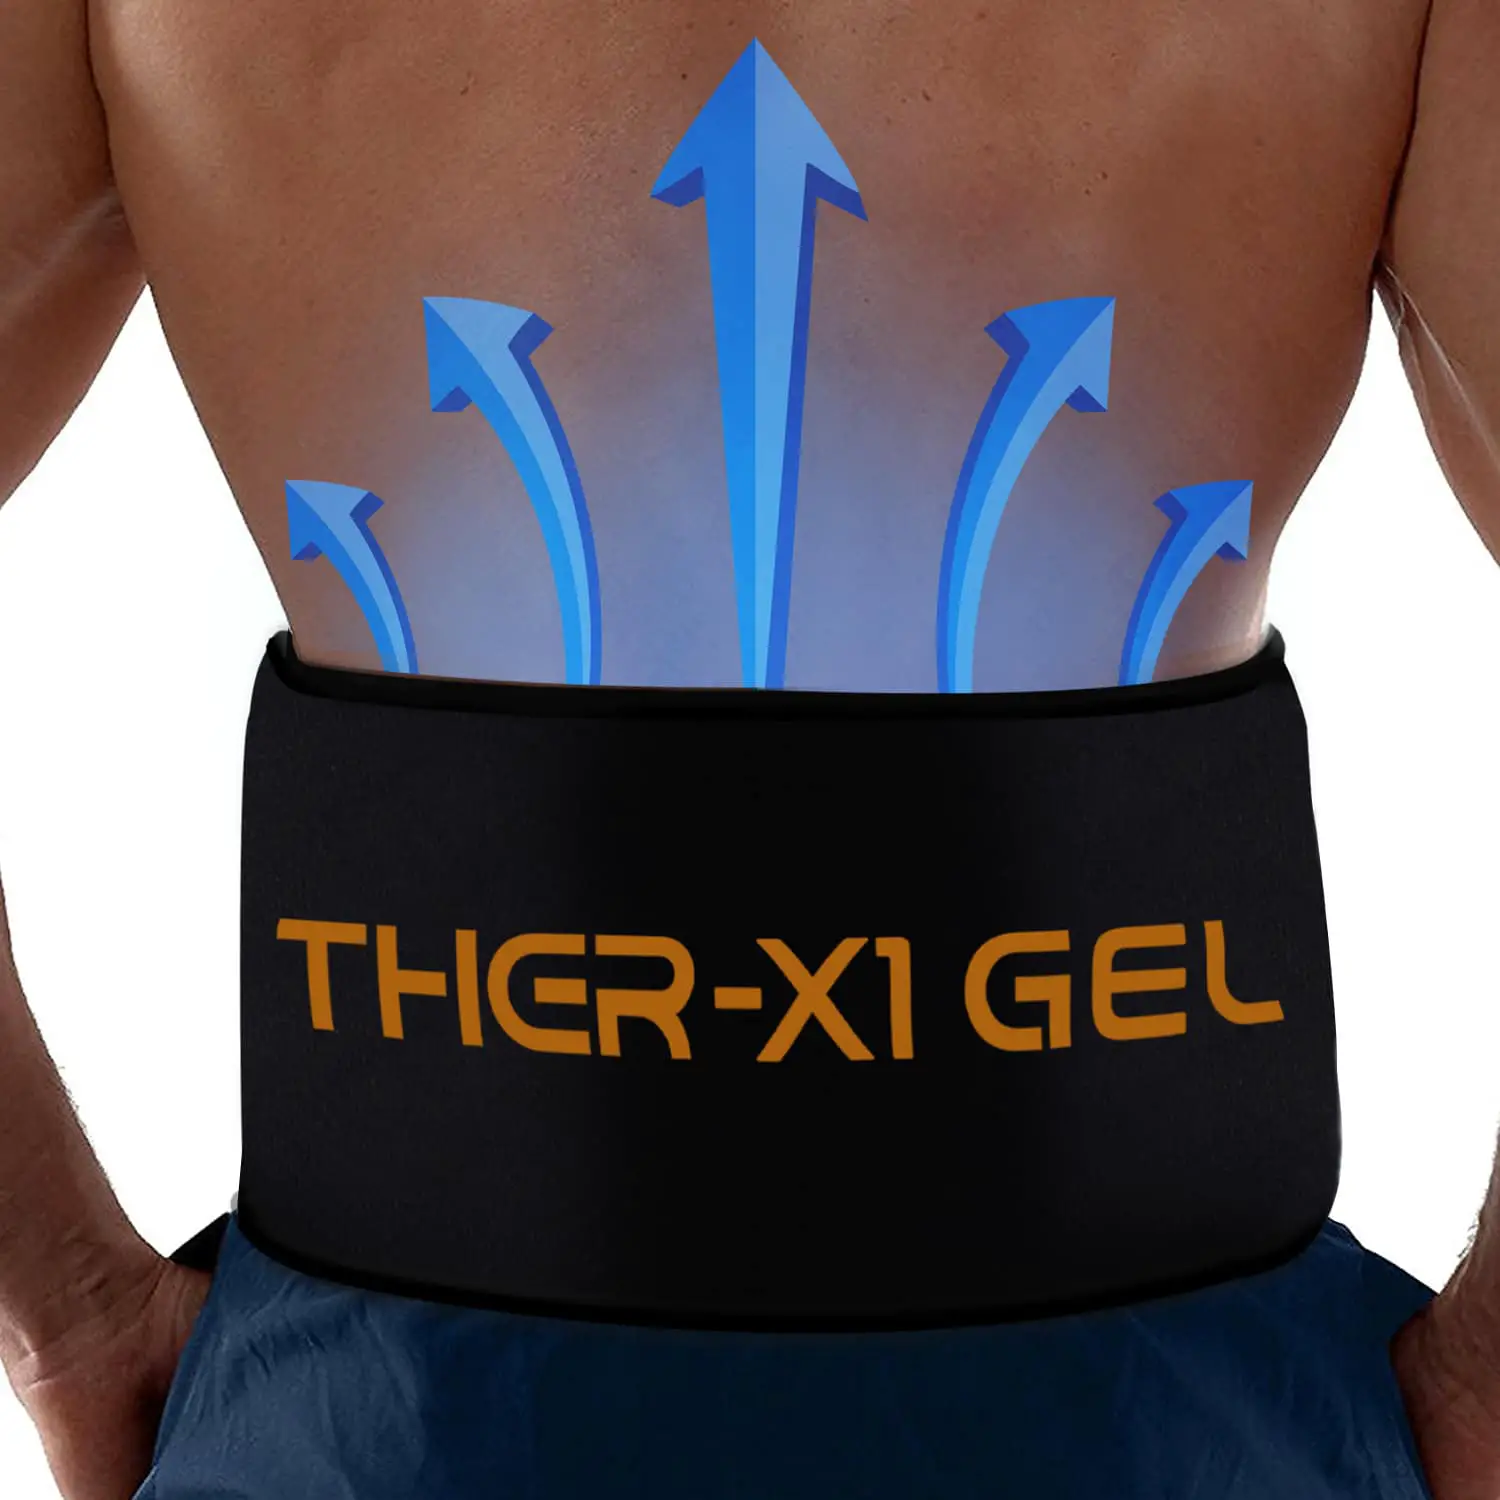 Back Pain Cold Reusable Ice Pack Belt Therapy For Lower Lumbar ...